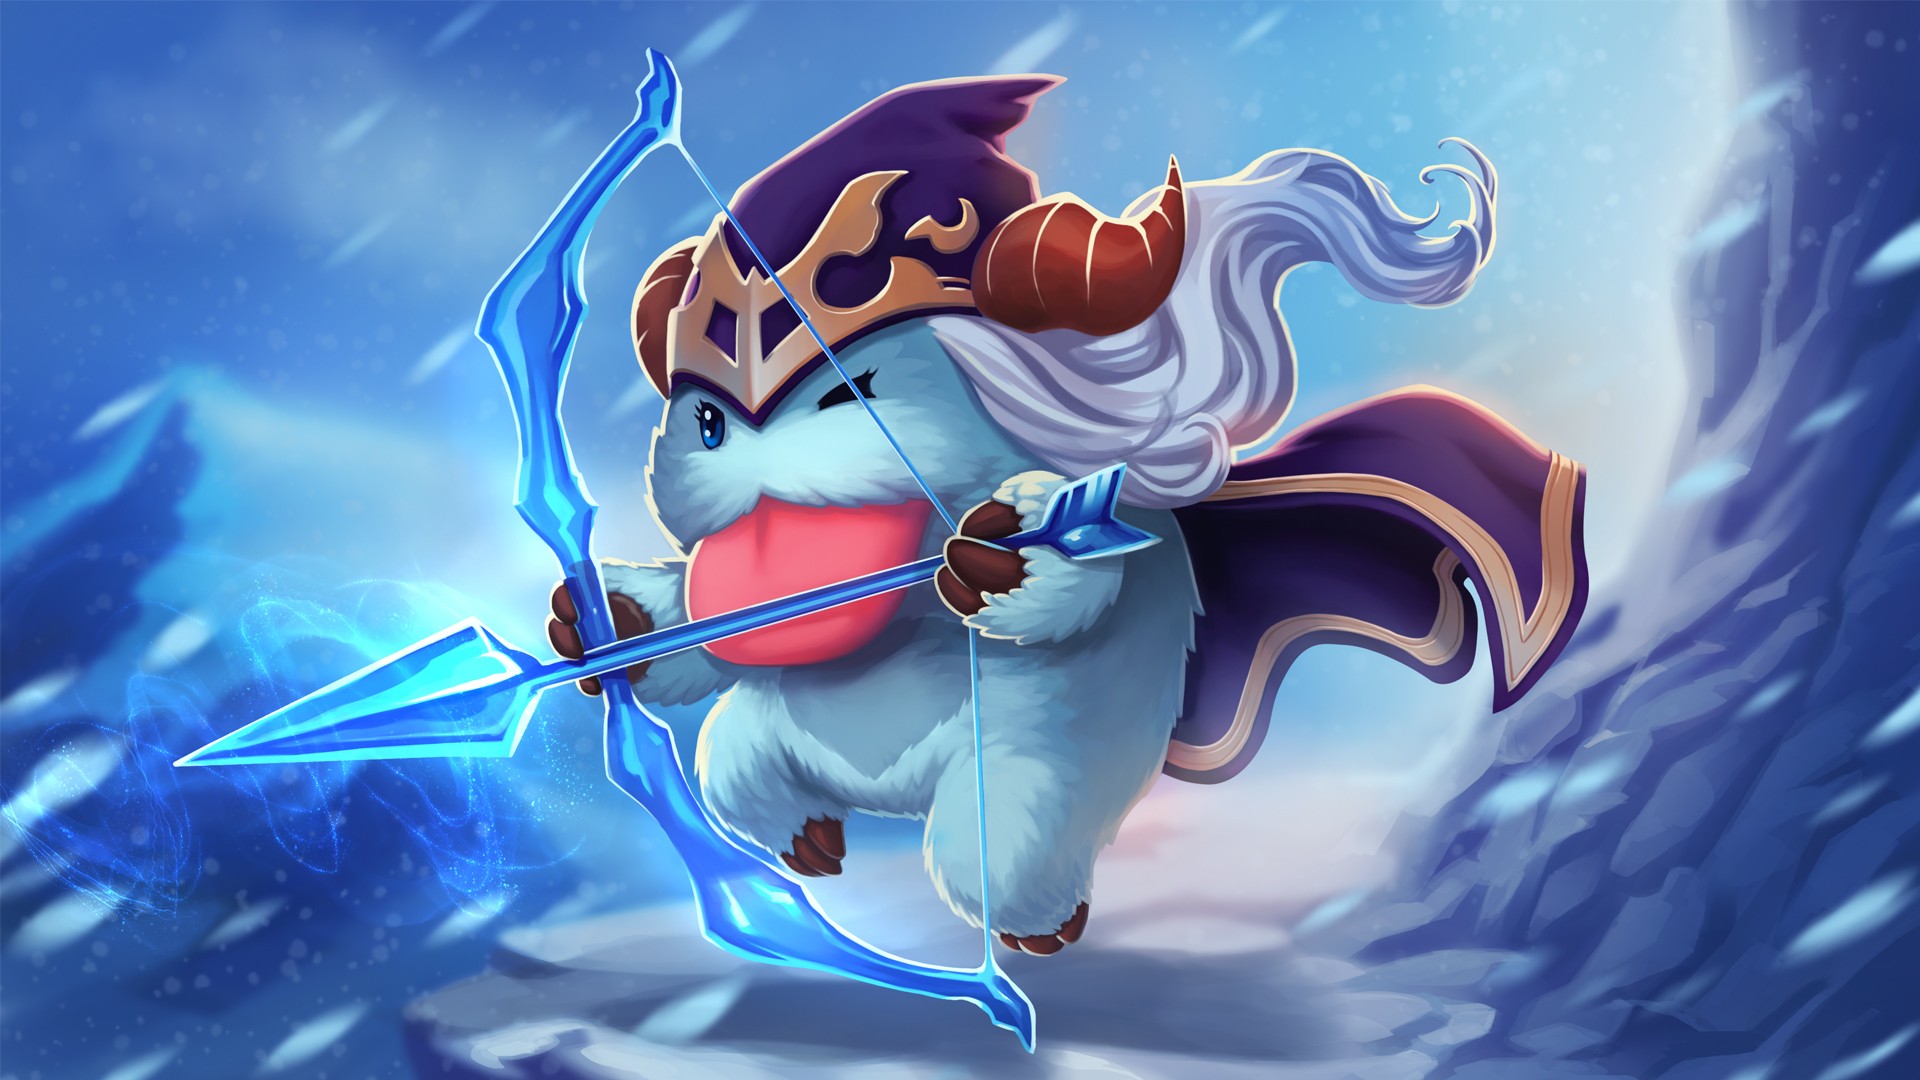 General 1920x1080 League of Legends video game art Ashe (League of Legends) Poro (League of Legends) PC gaming bow video game characters digital art